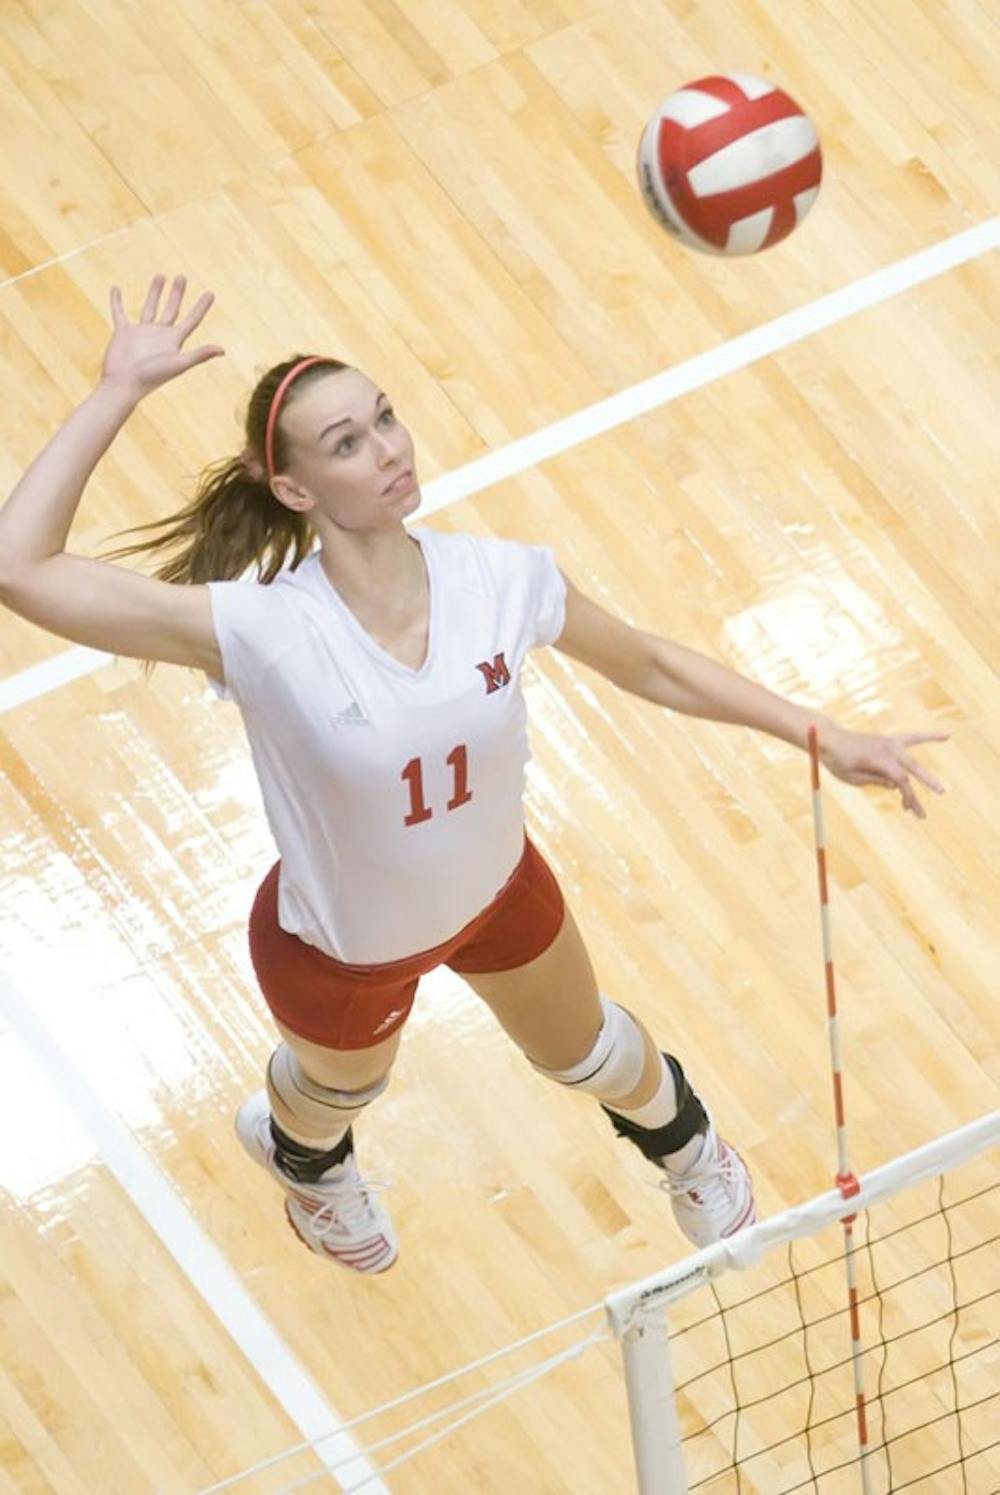 Michele Metzler goes up for a spike during a game at Millett Hall.